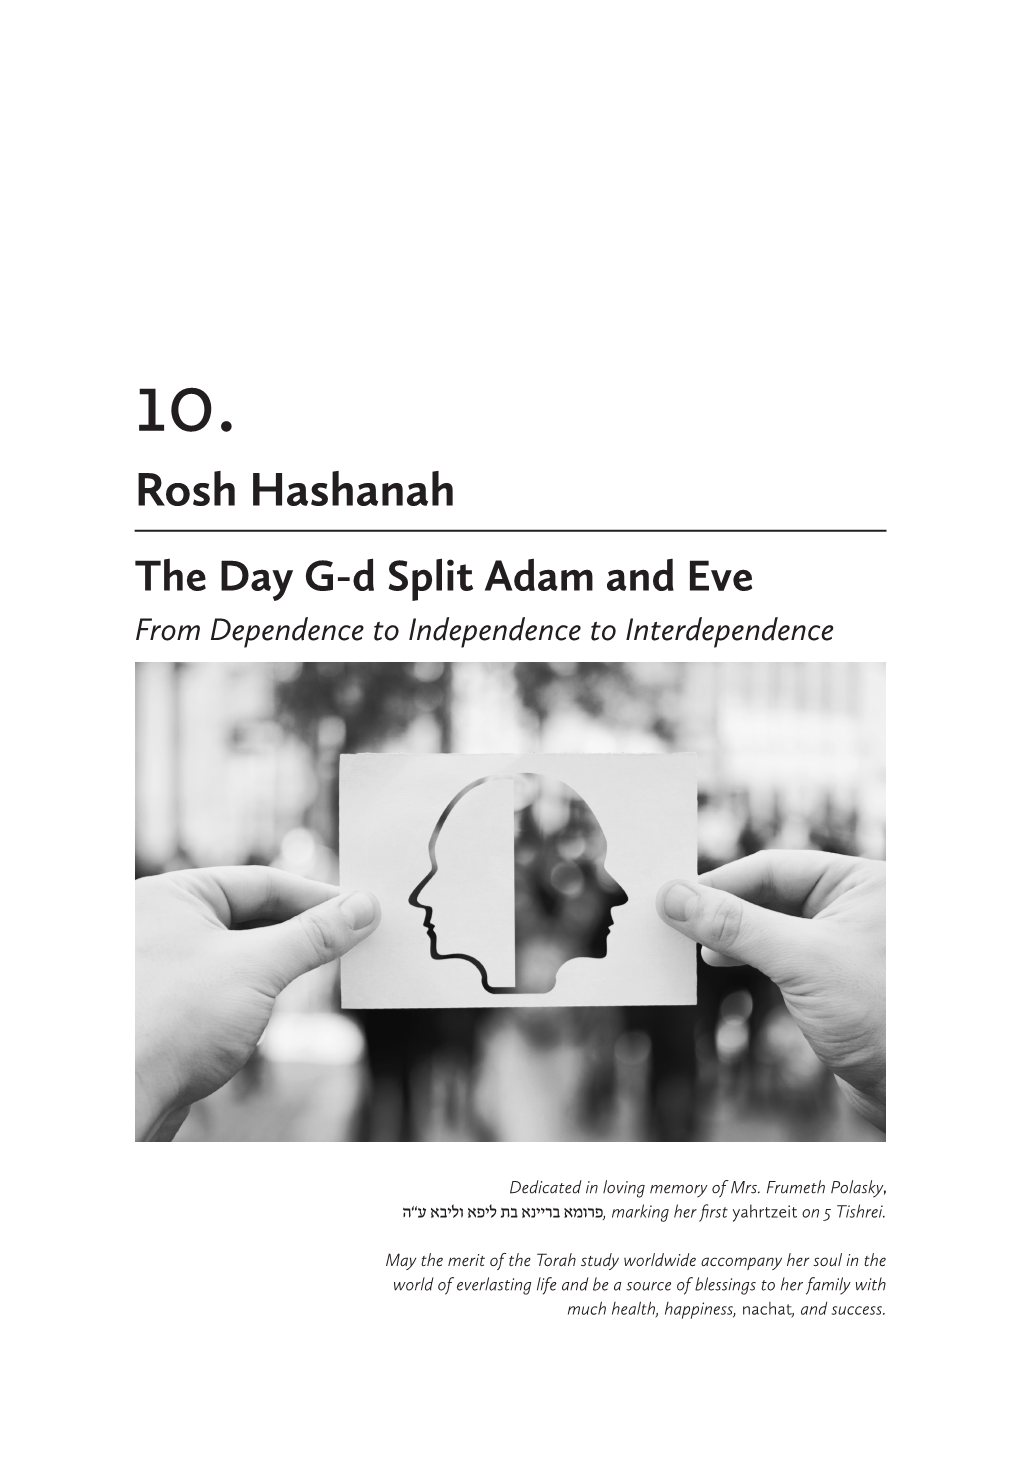 Rosh Hashanah the Day G-D Split Adam and Eve from Dependence to Independence to Interdependence